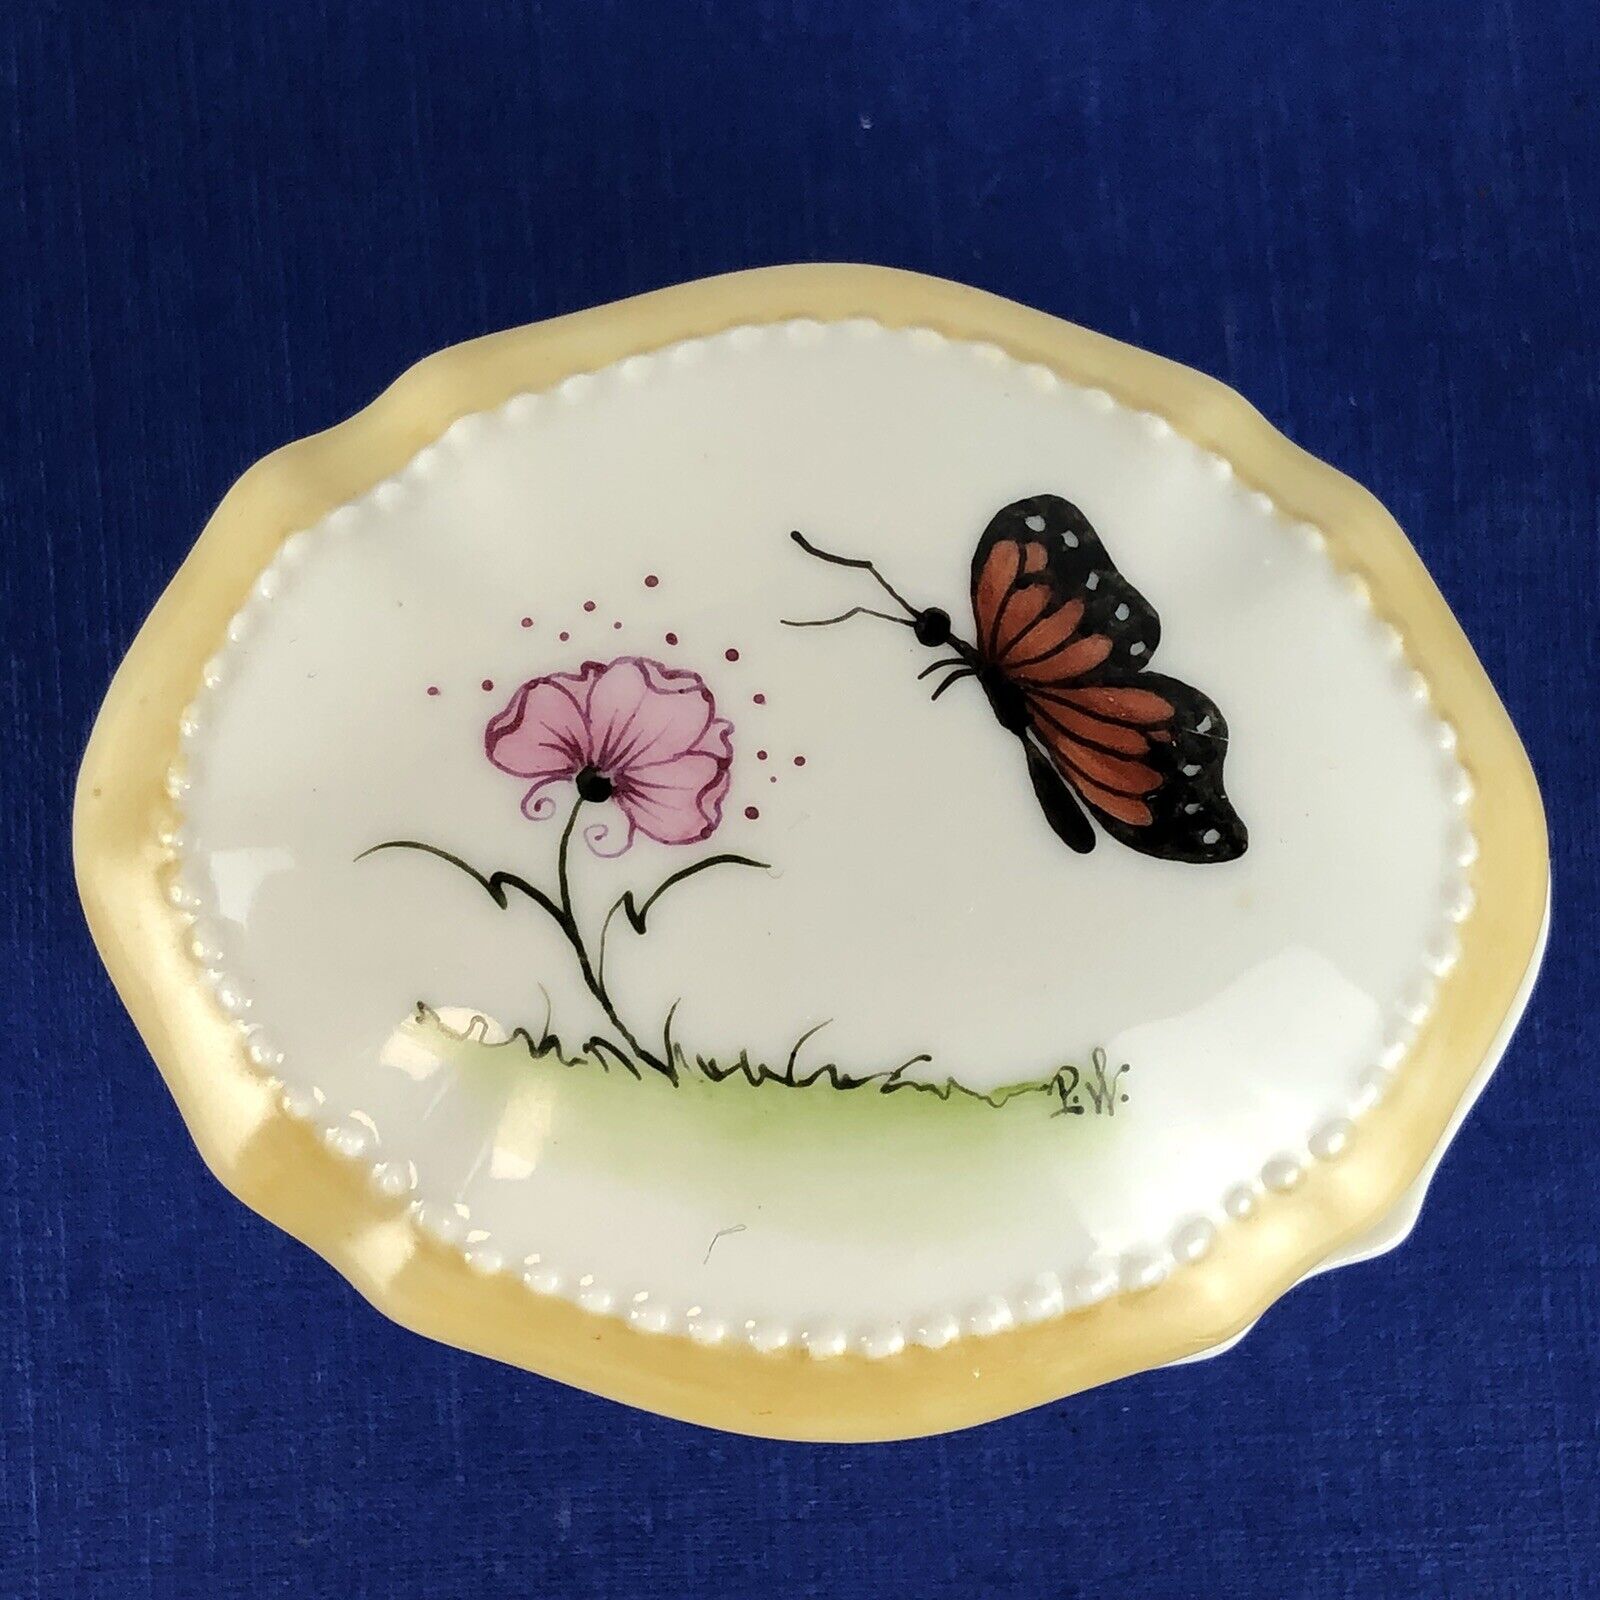 Trinket Box Floral Ceramic Hand Painted Butterfly Floral Pink Flower￼ Signed